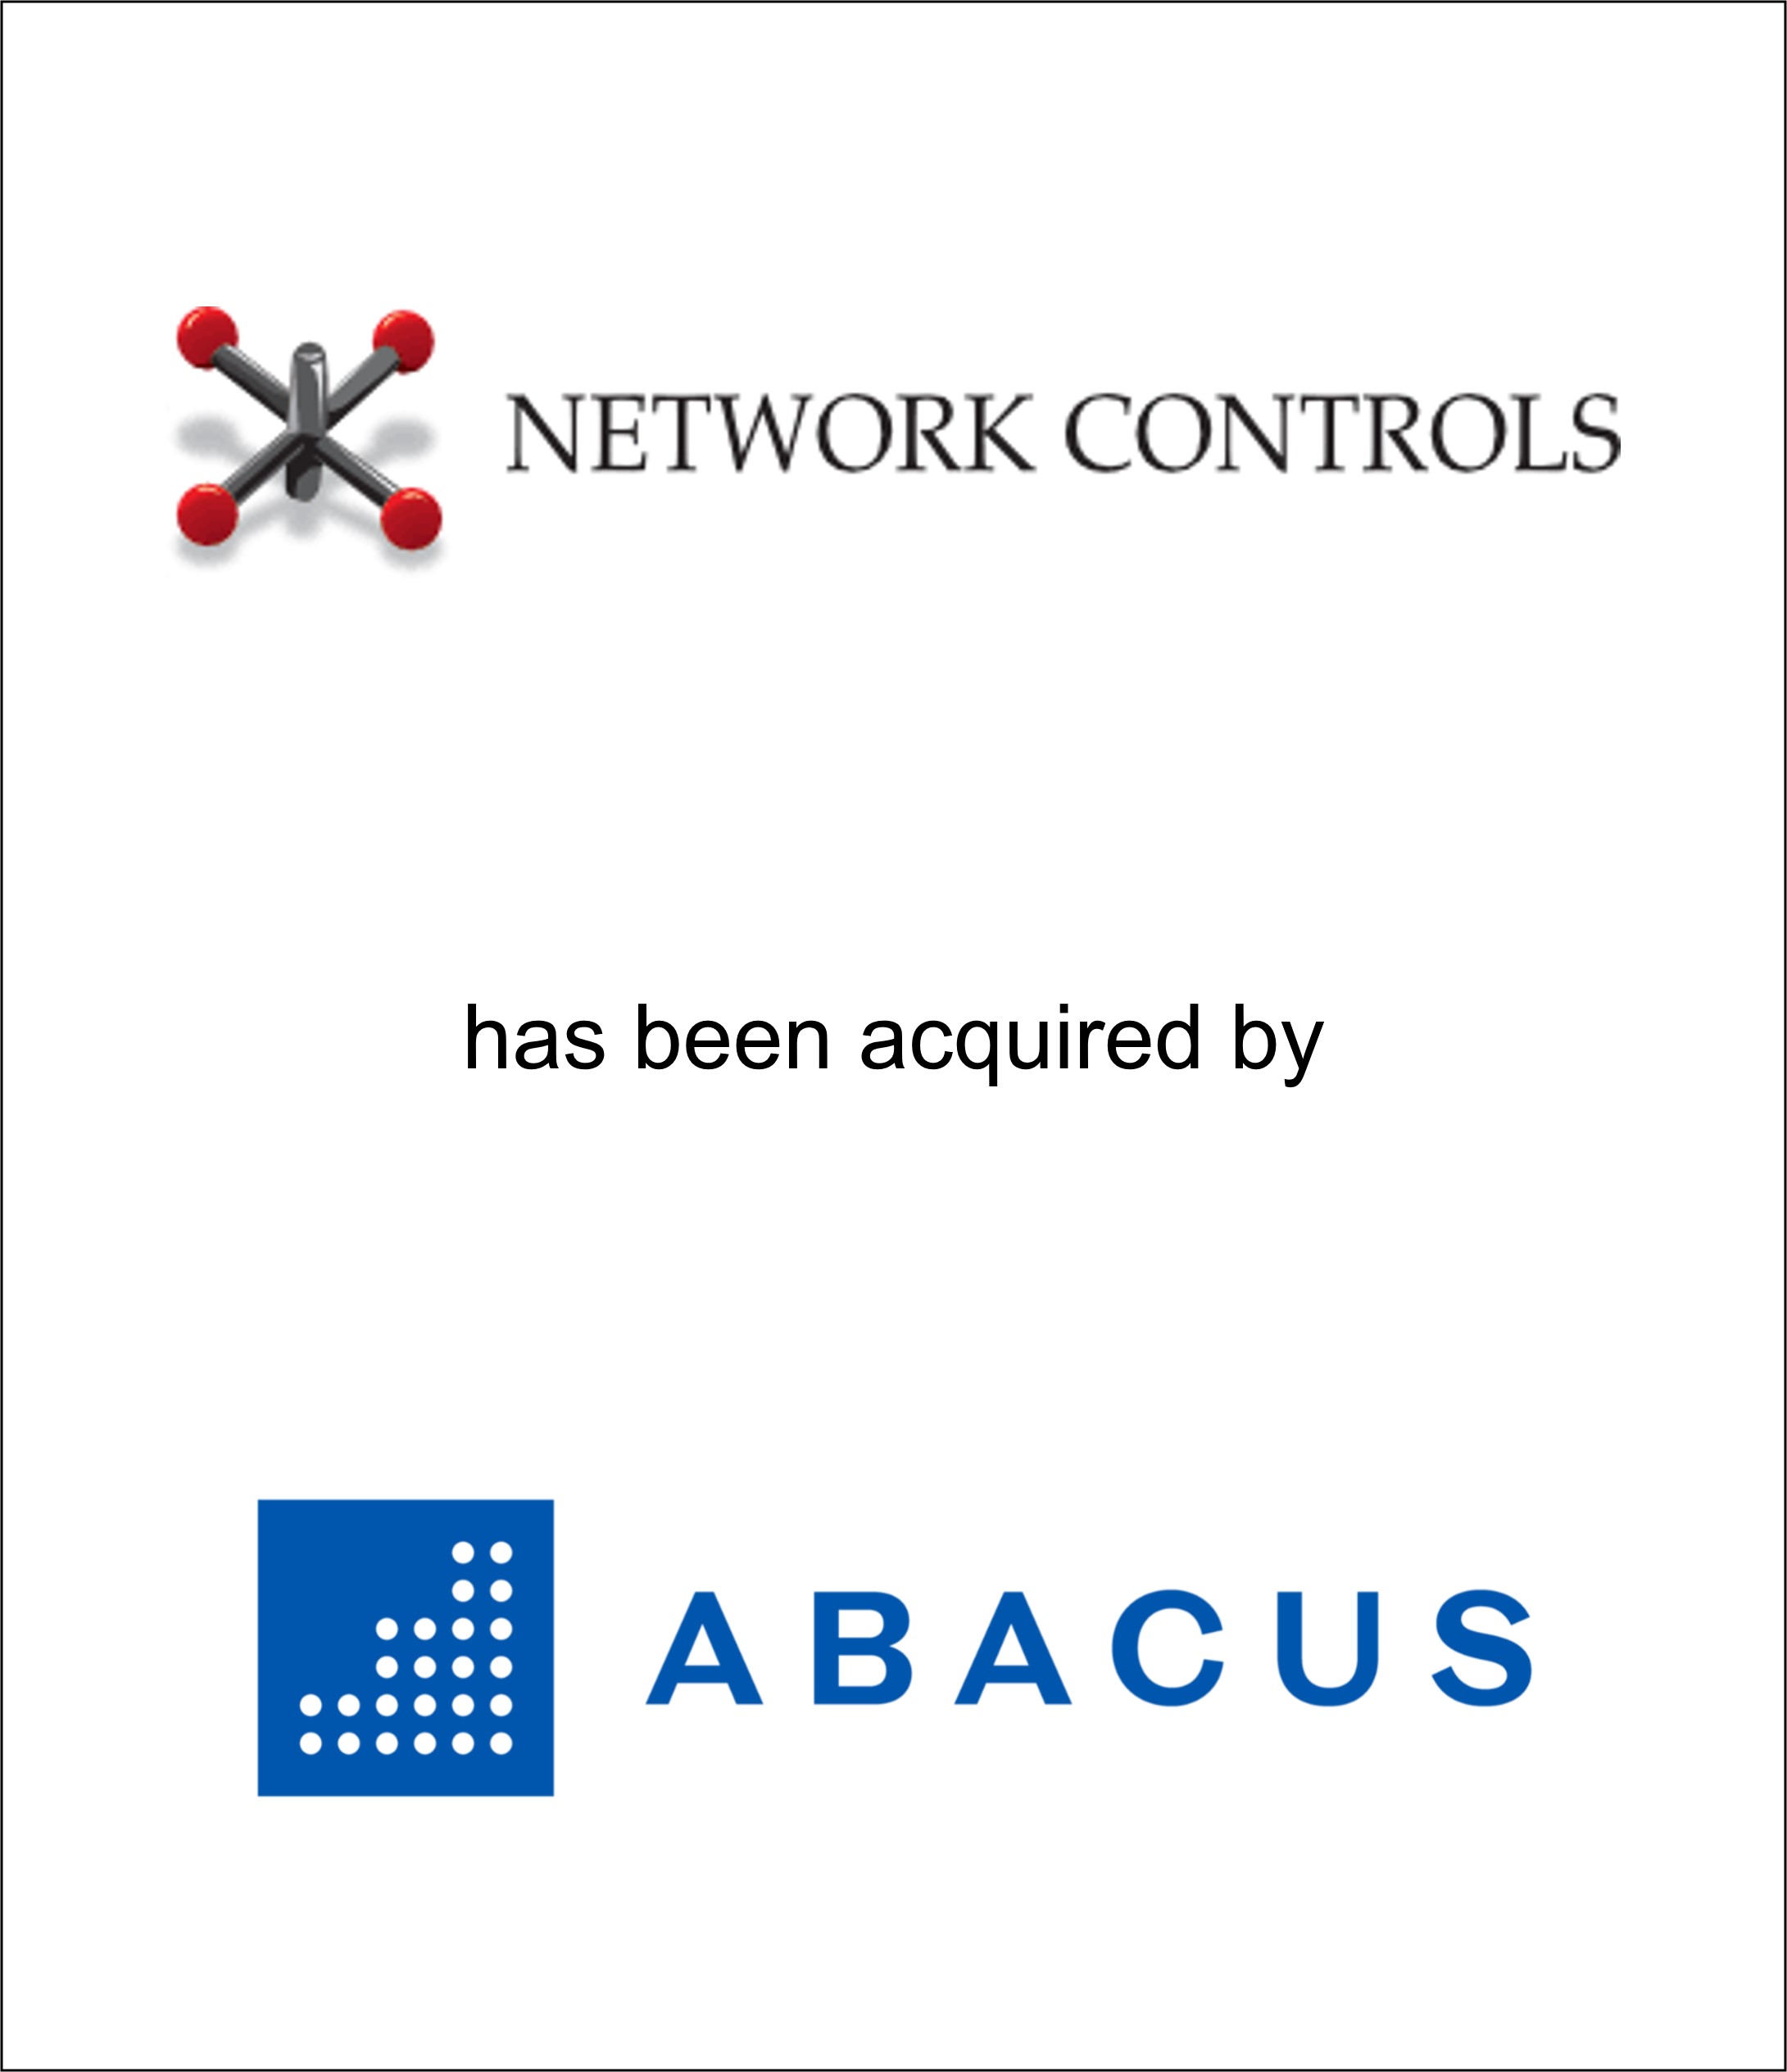 Genesis Capital Advises Network Controls on its Sale to Abacus Investments